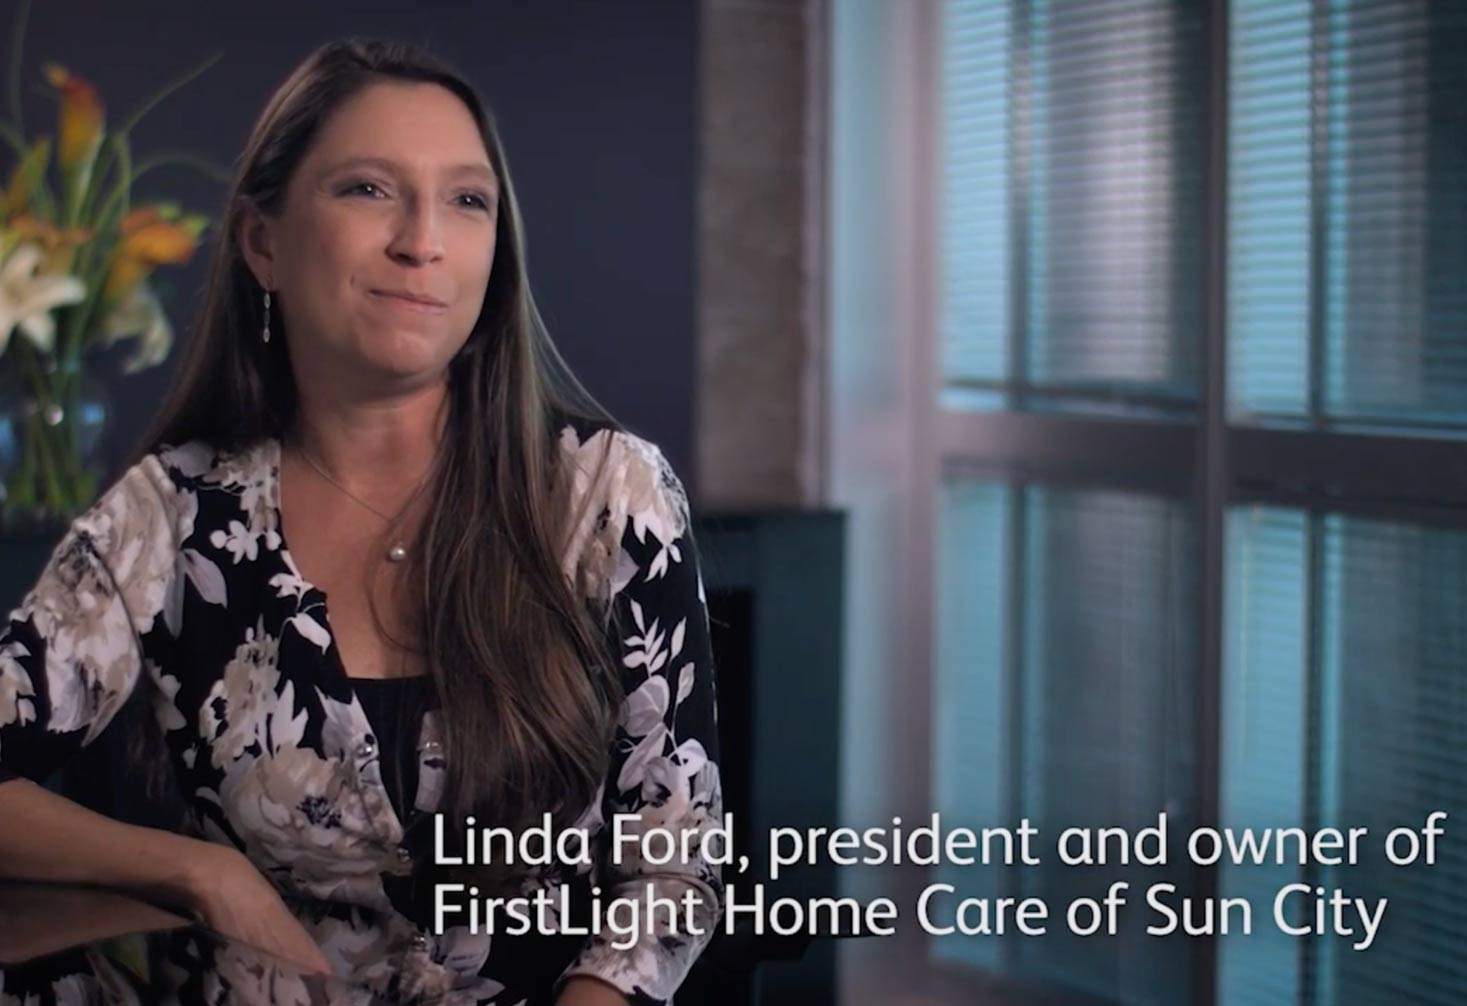 Linda Ford, president and owner of FirstLight Home Care of Sun City